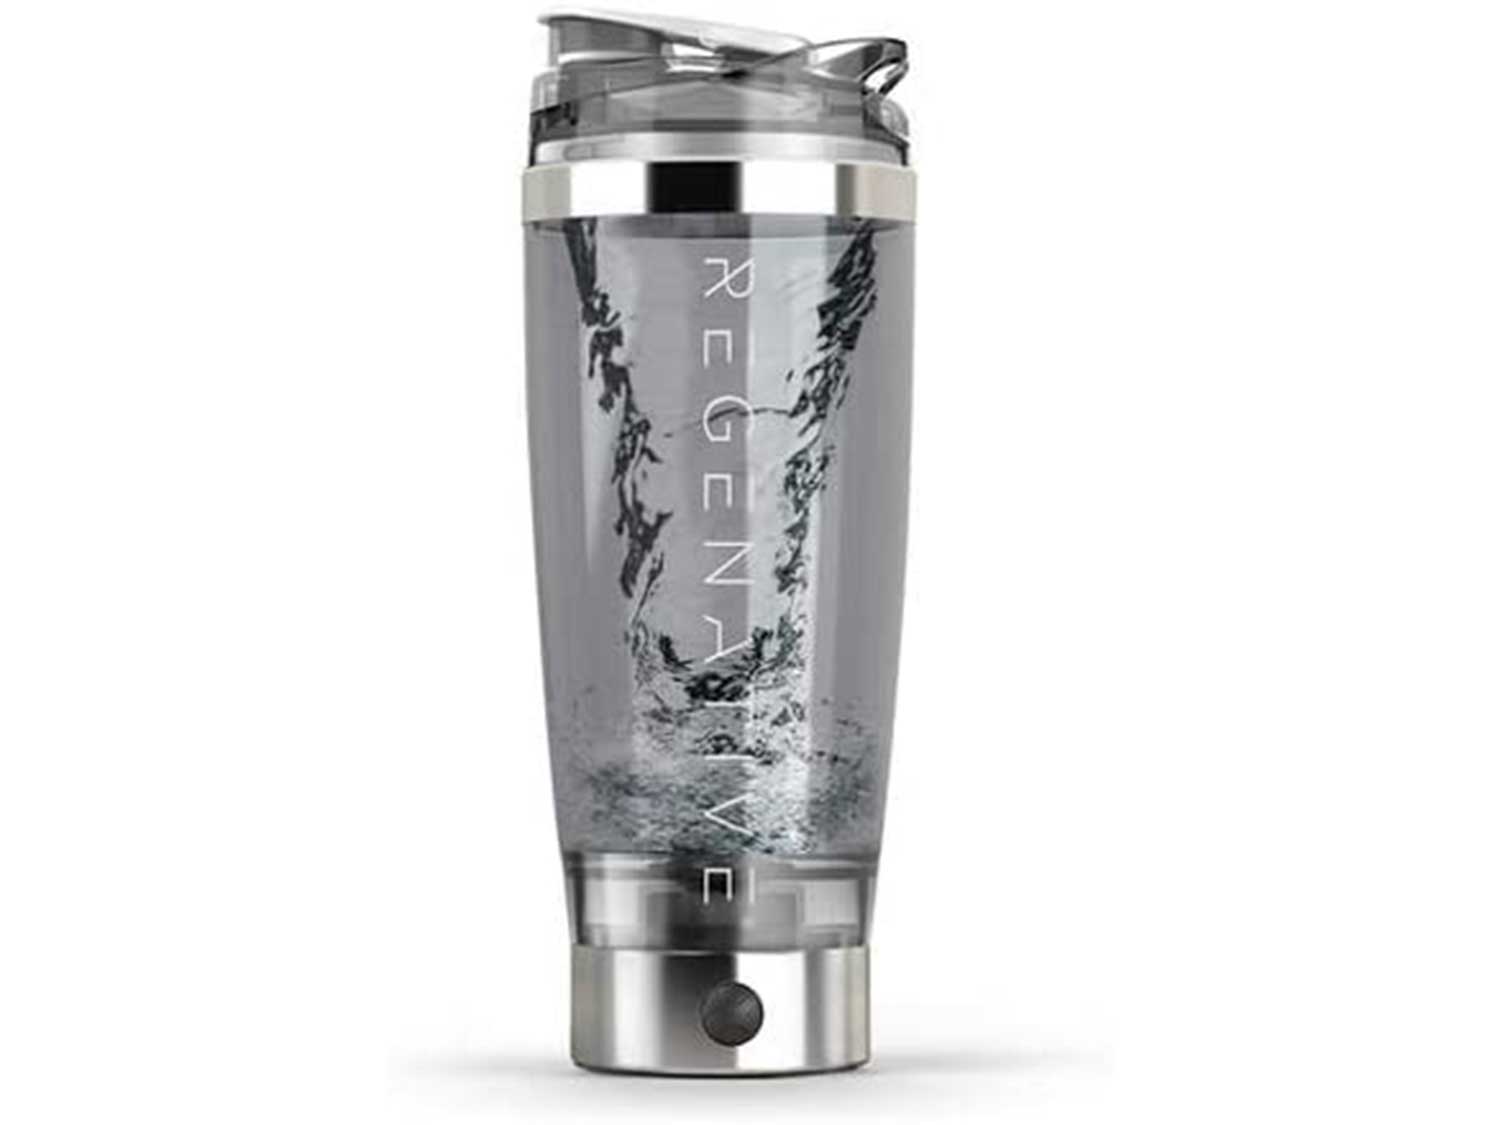 PROMiXX iX-R - REGENATIVE Edition Electric Shaker Bottle, Powerful Mixer for Smooth Shakes. 20oz Tumbler is BPA Free, Odor & Stain Resistant and Includes Built-in Supplement Storage (Silver/White)